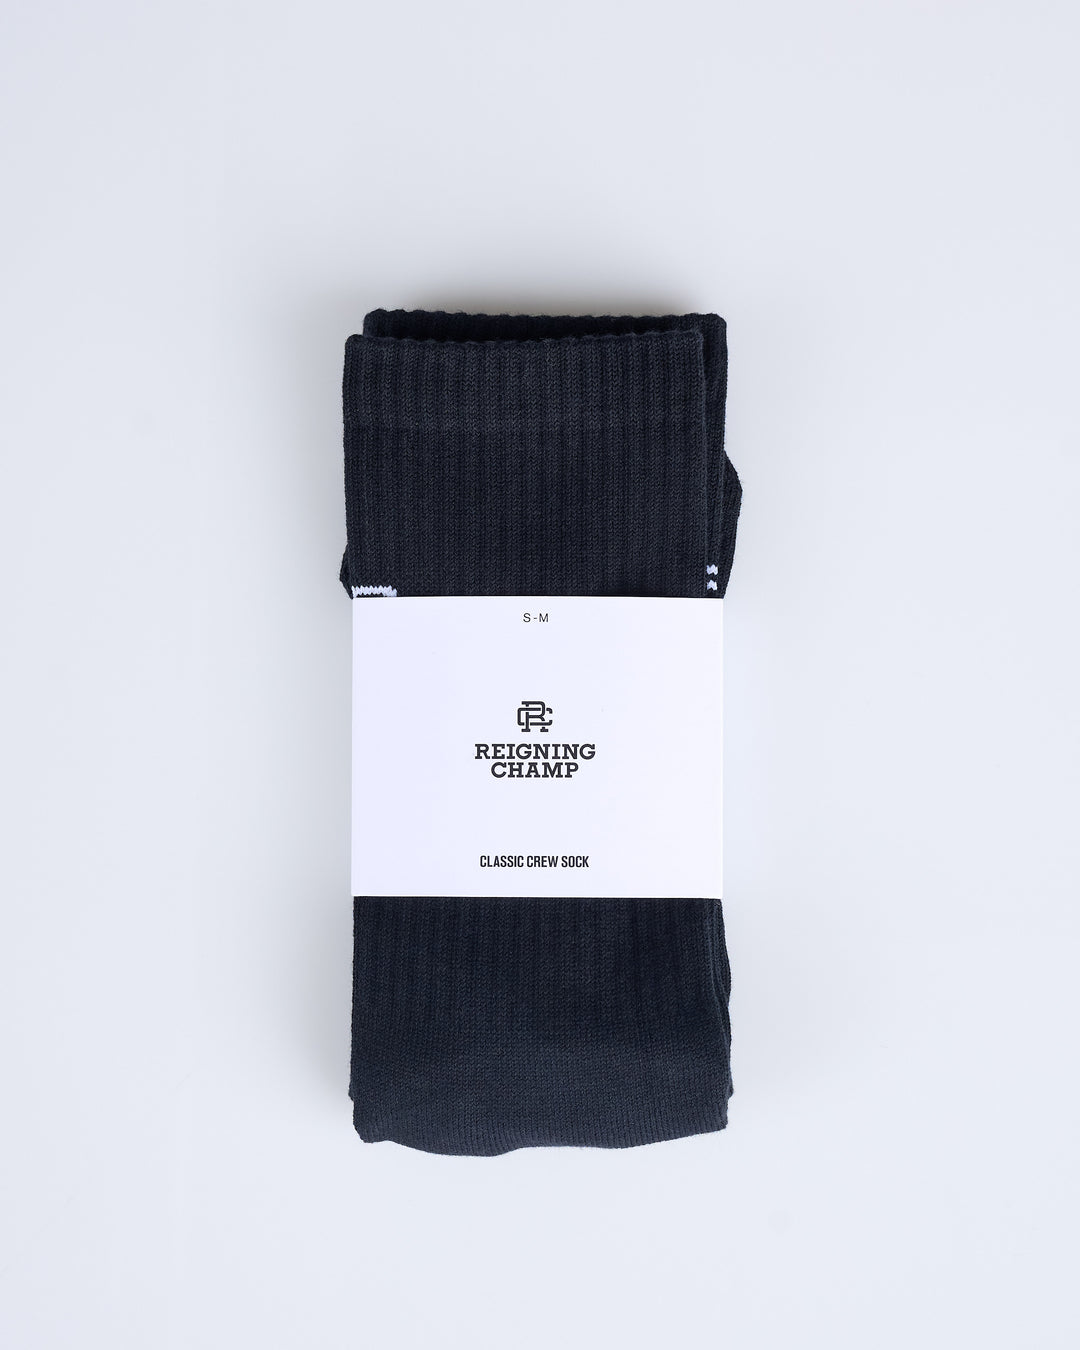 Reigning Champ Knit Classic Crew Sock Black/White